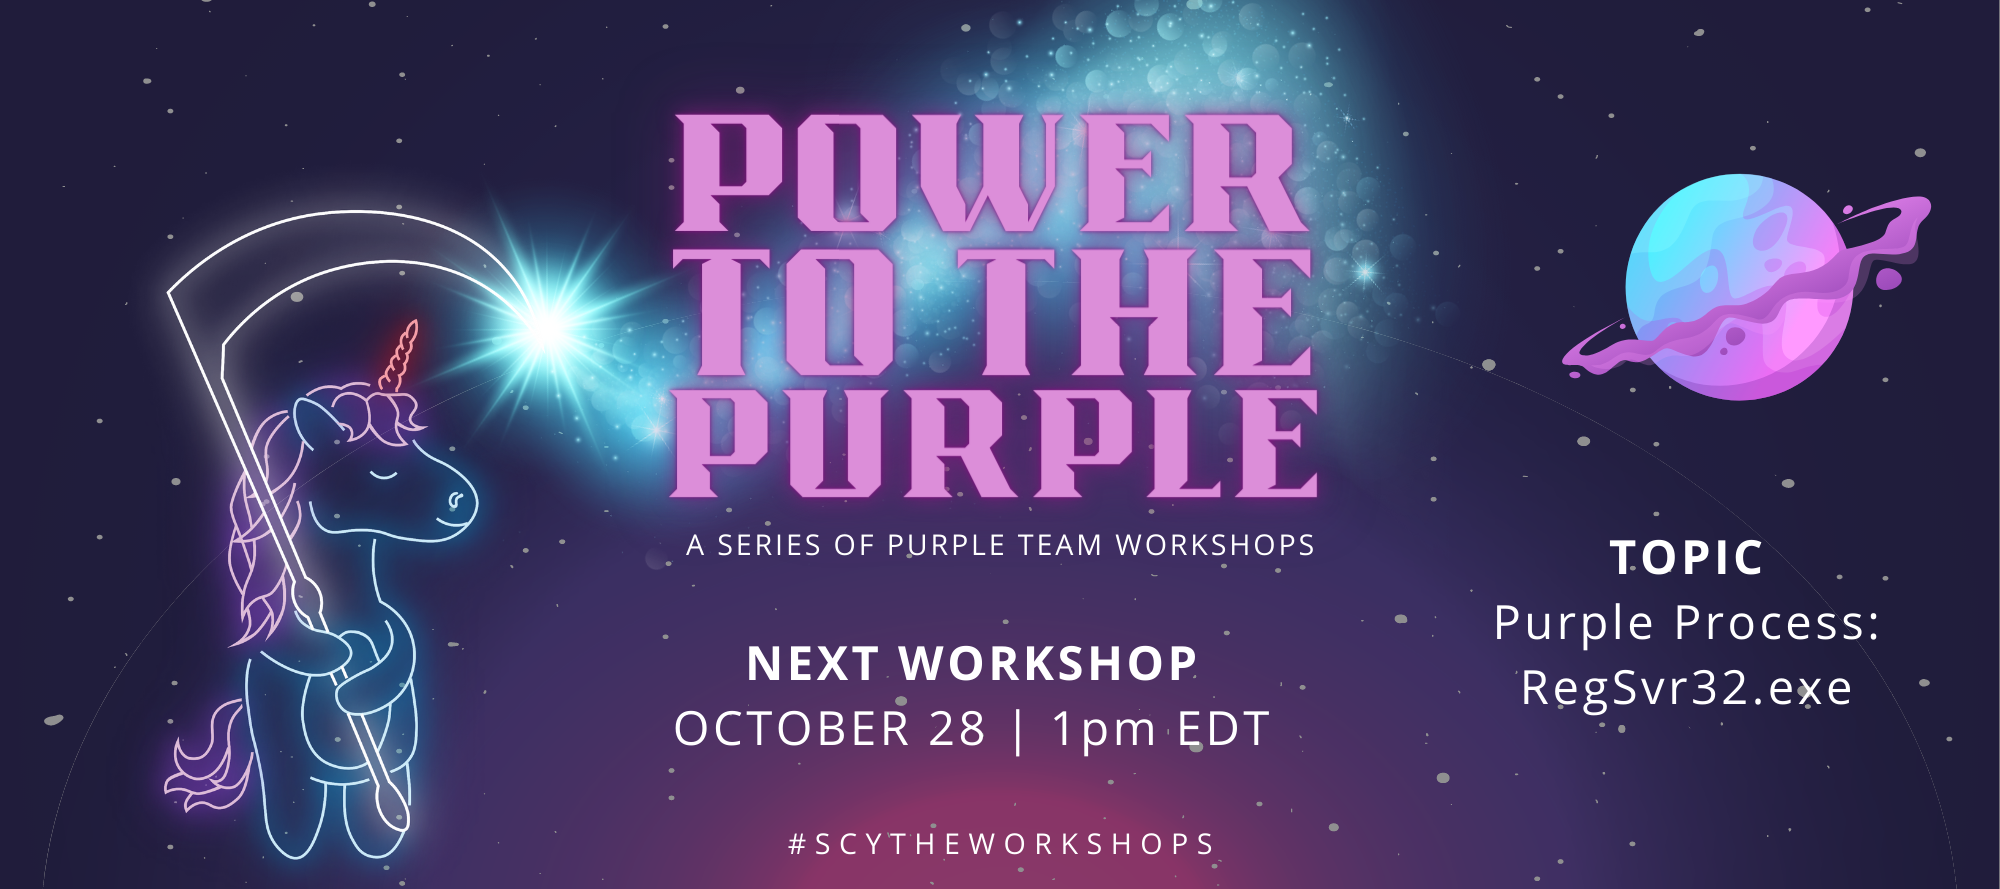 POWER TO THE PURPLE 
WORKSHOP: OCTOBER 28